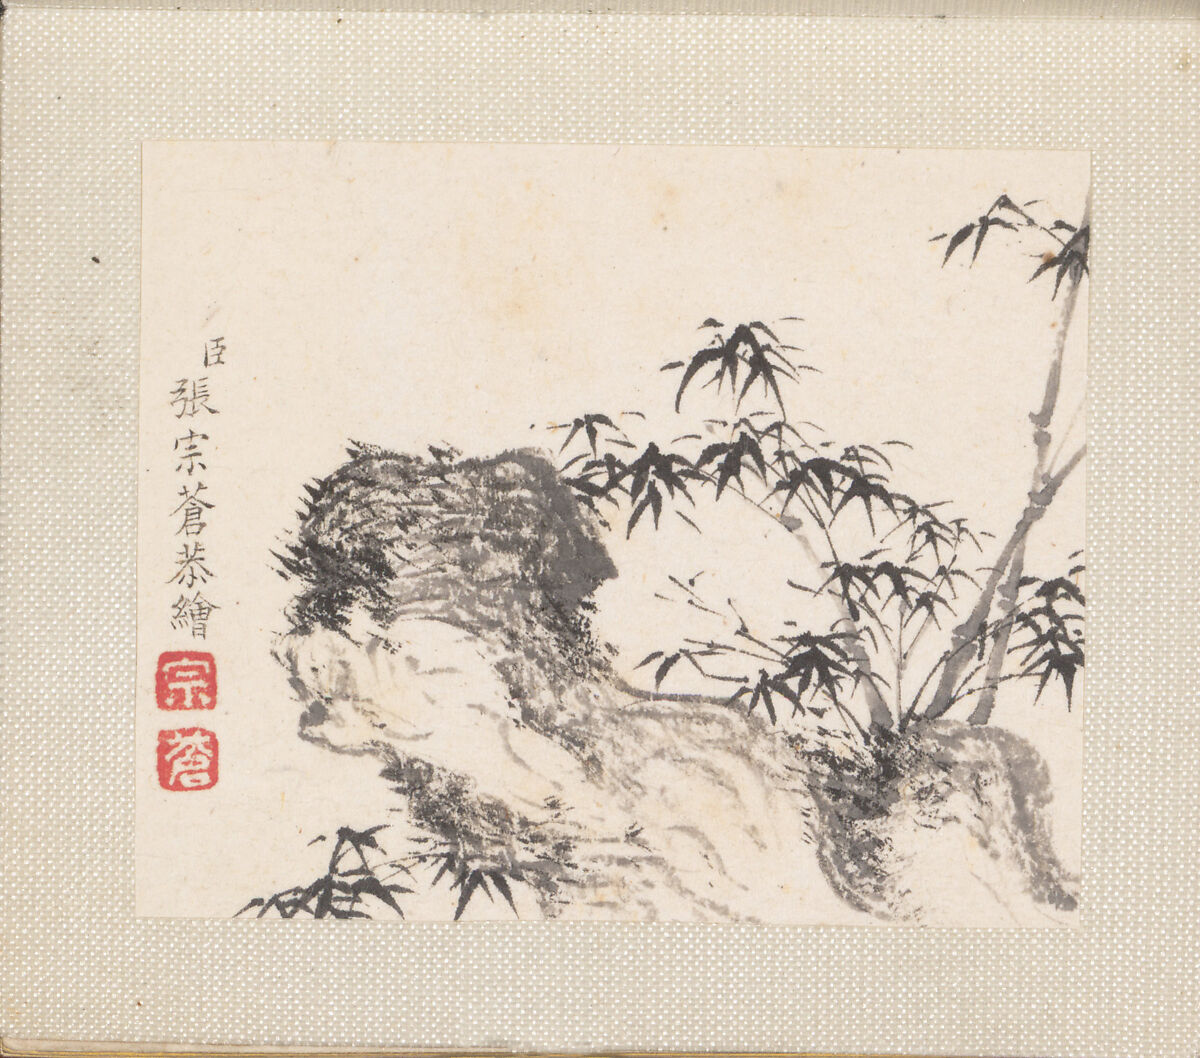 Miniature landscapes, Zhang Zongcang (Chinese, 1686–1756), Album of eight leaves; ink and color on paper, China 